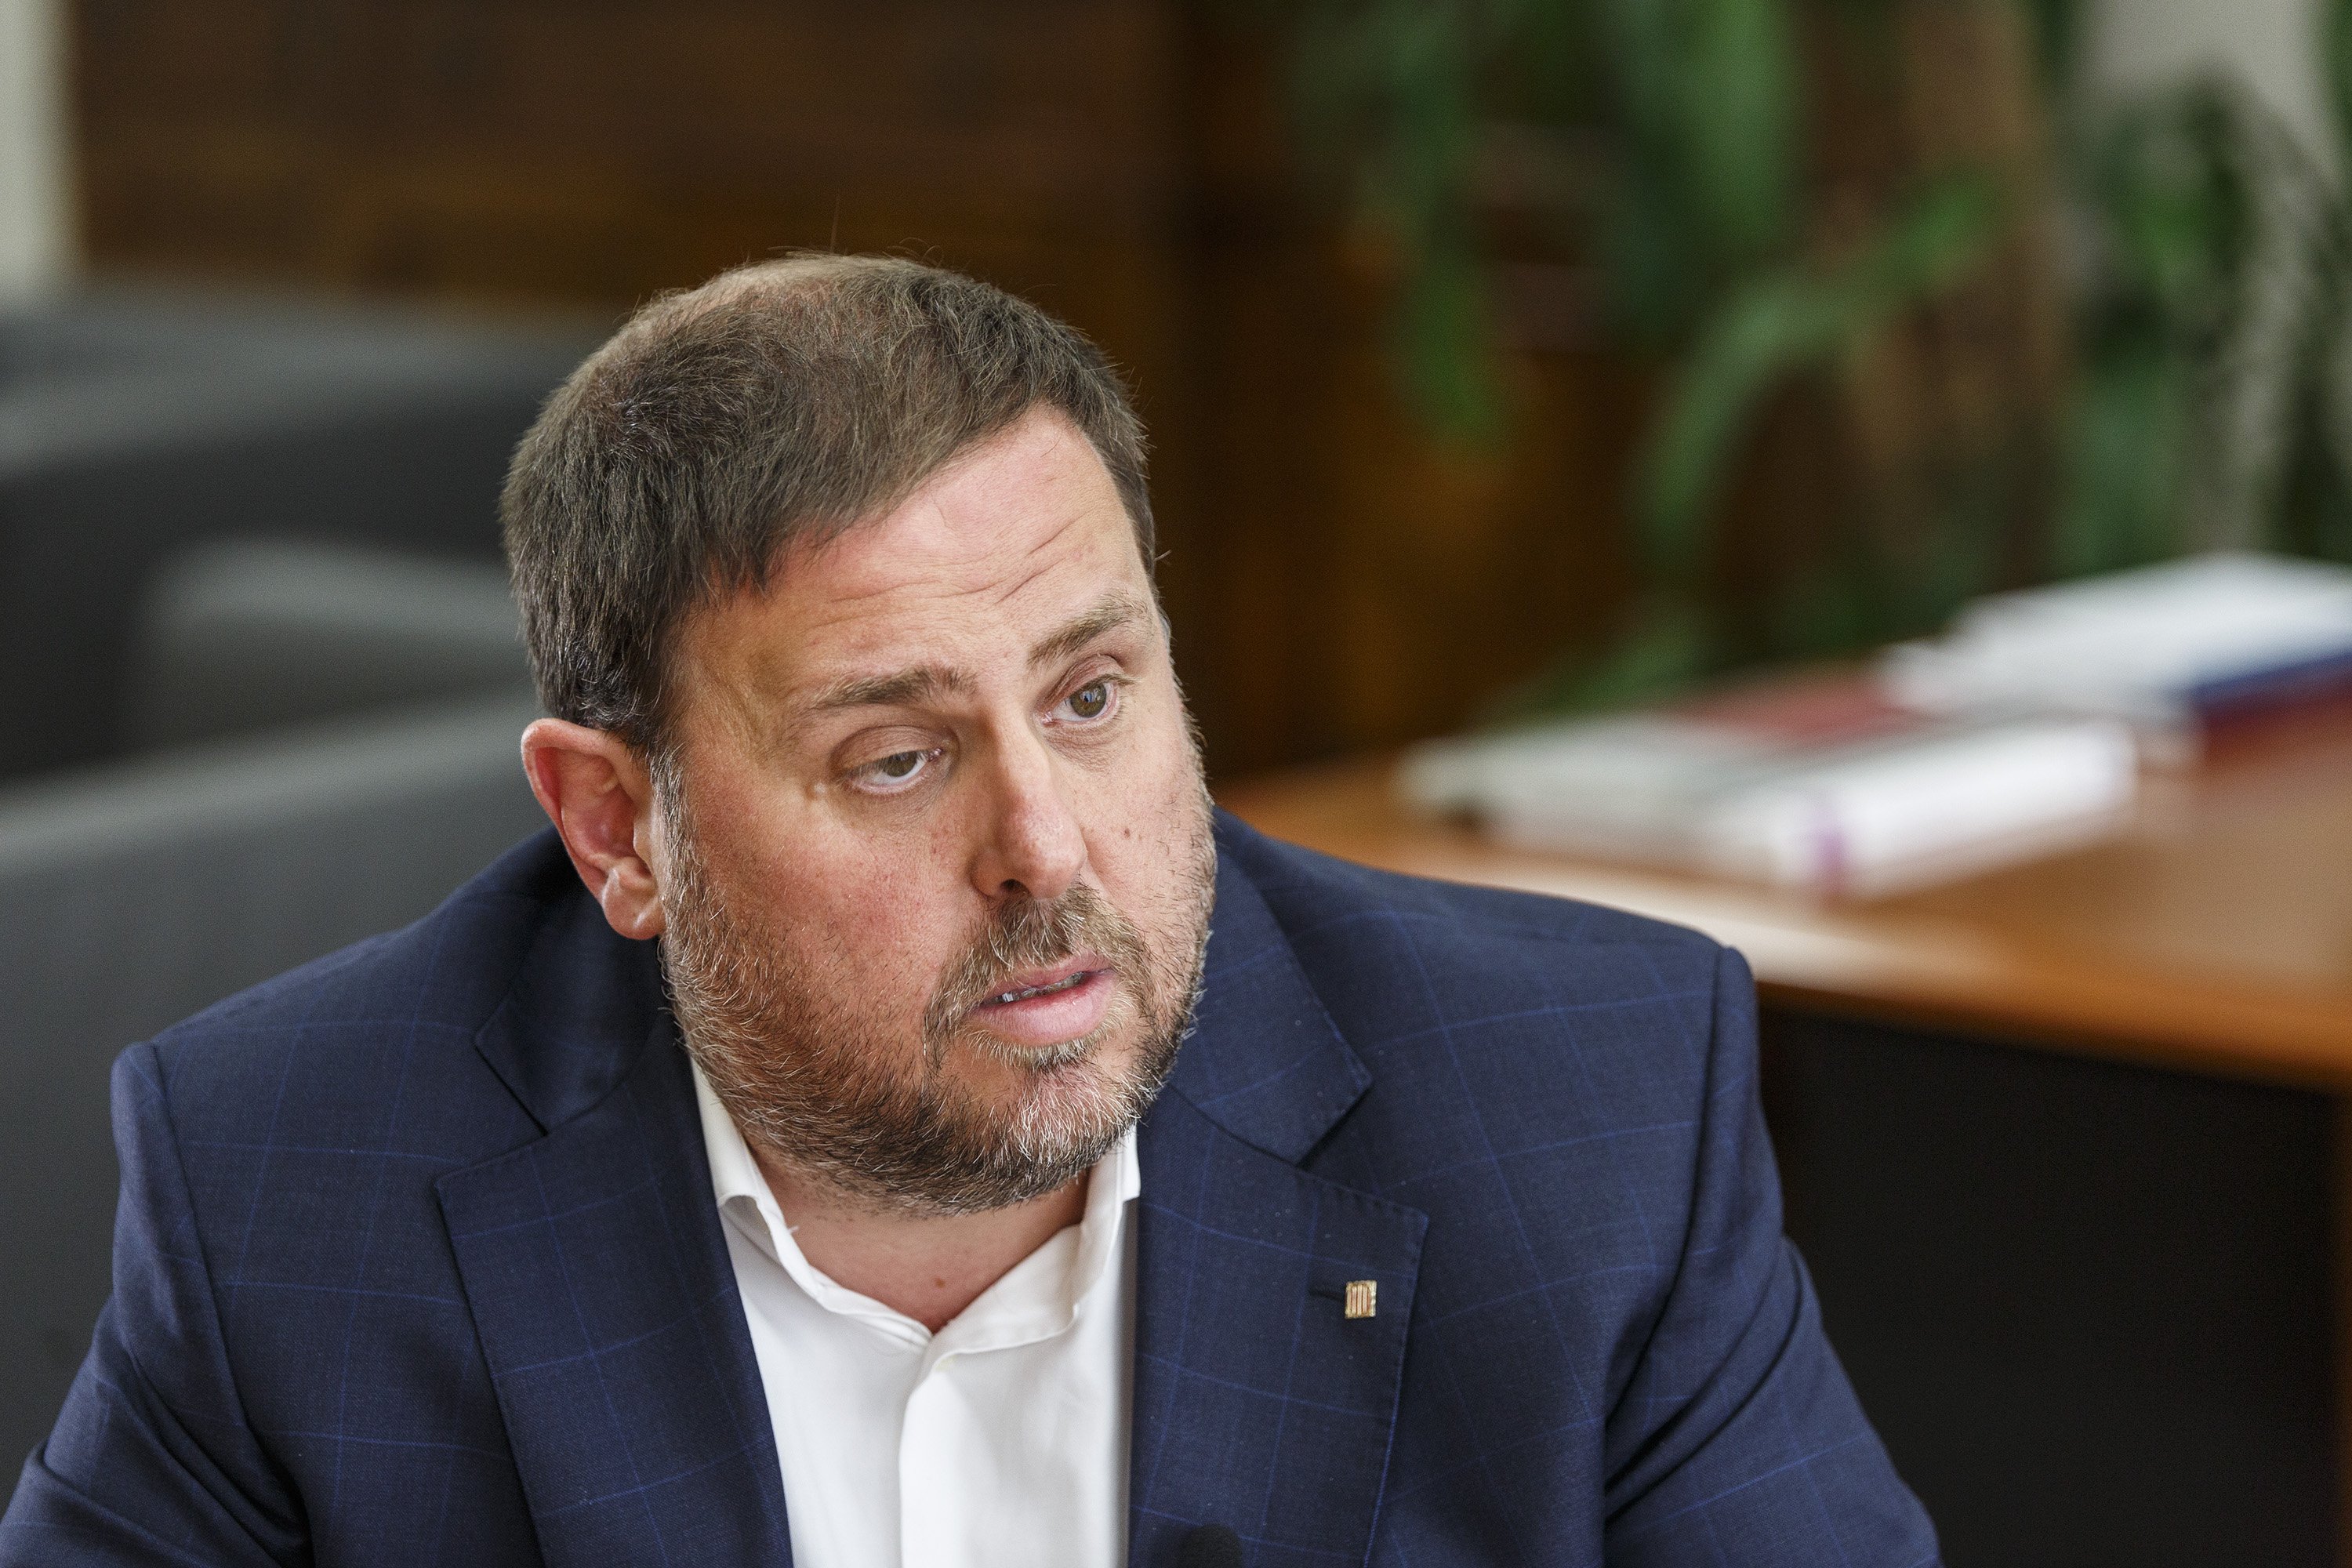 Junqueras: "An electoral interview is a first victory against the repression"